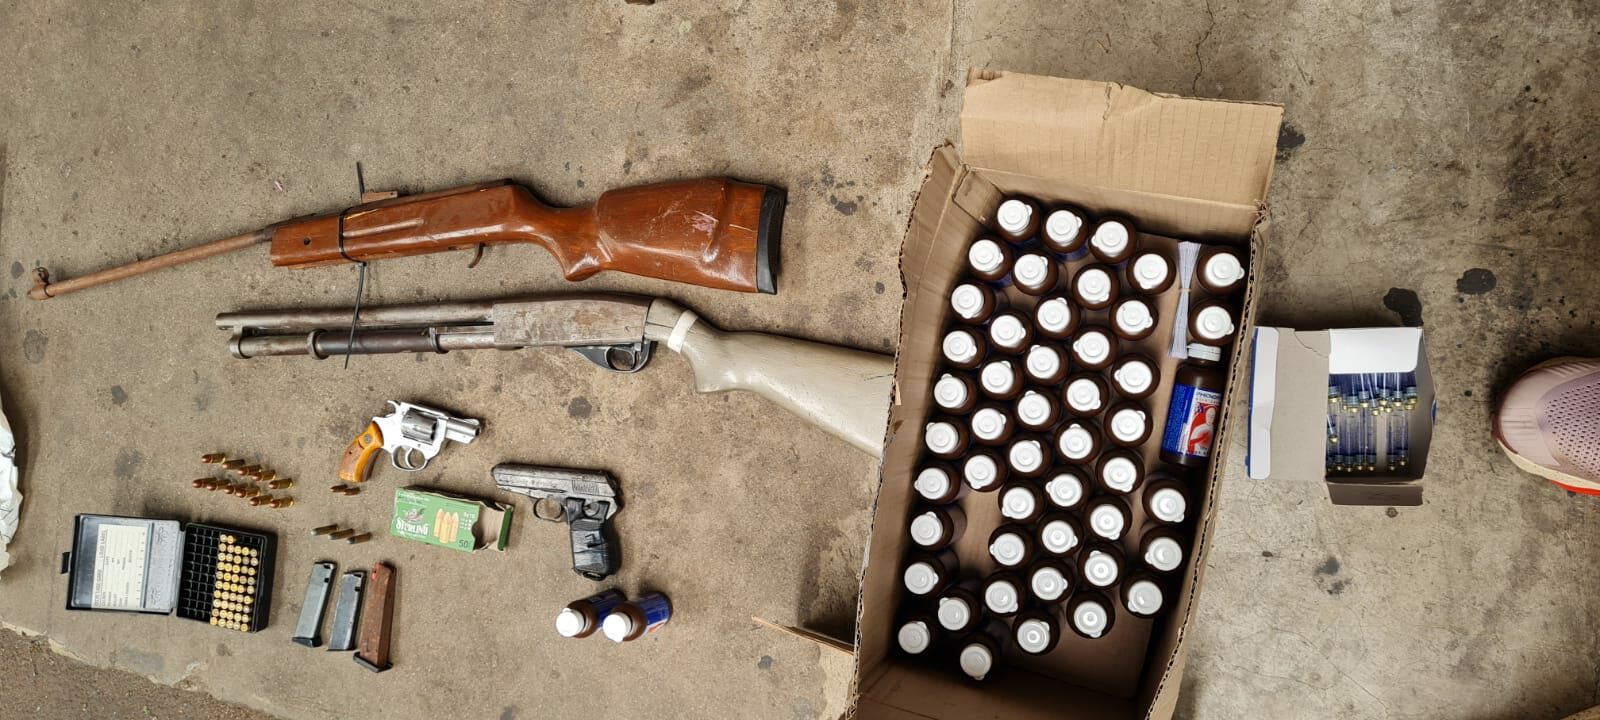 Firearms and ammunition recovered at a storage facility on Syringia Avenue